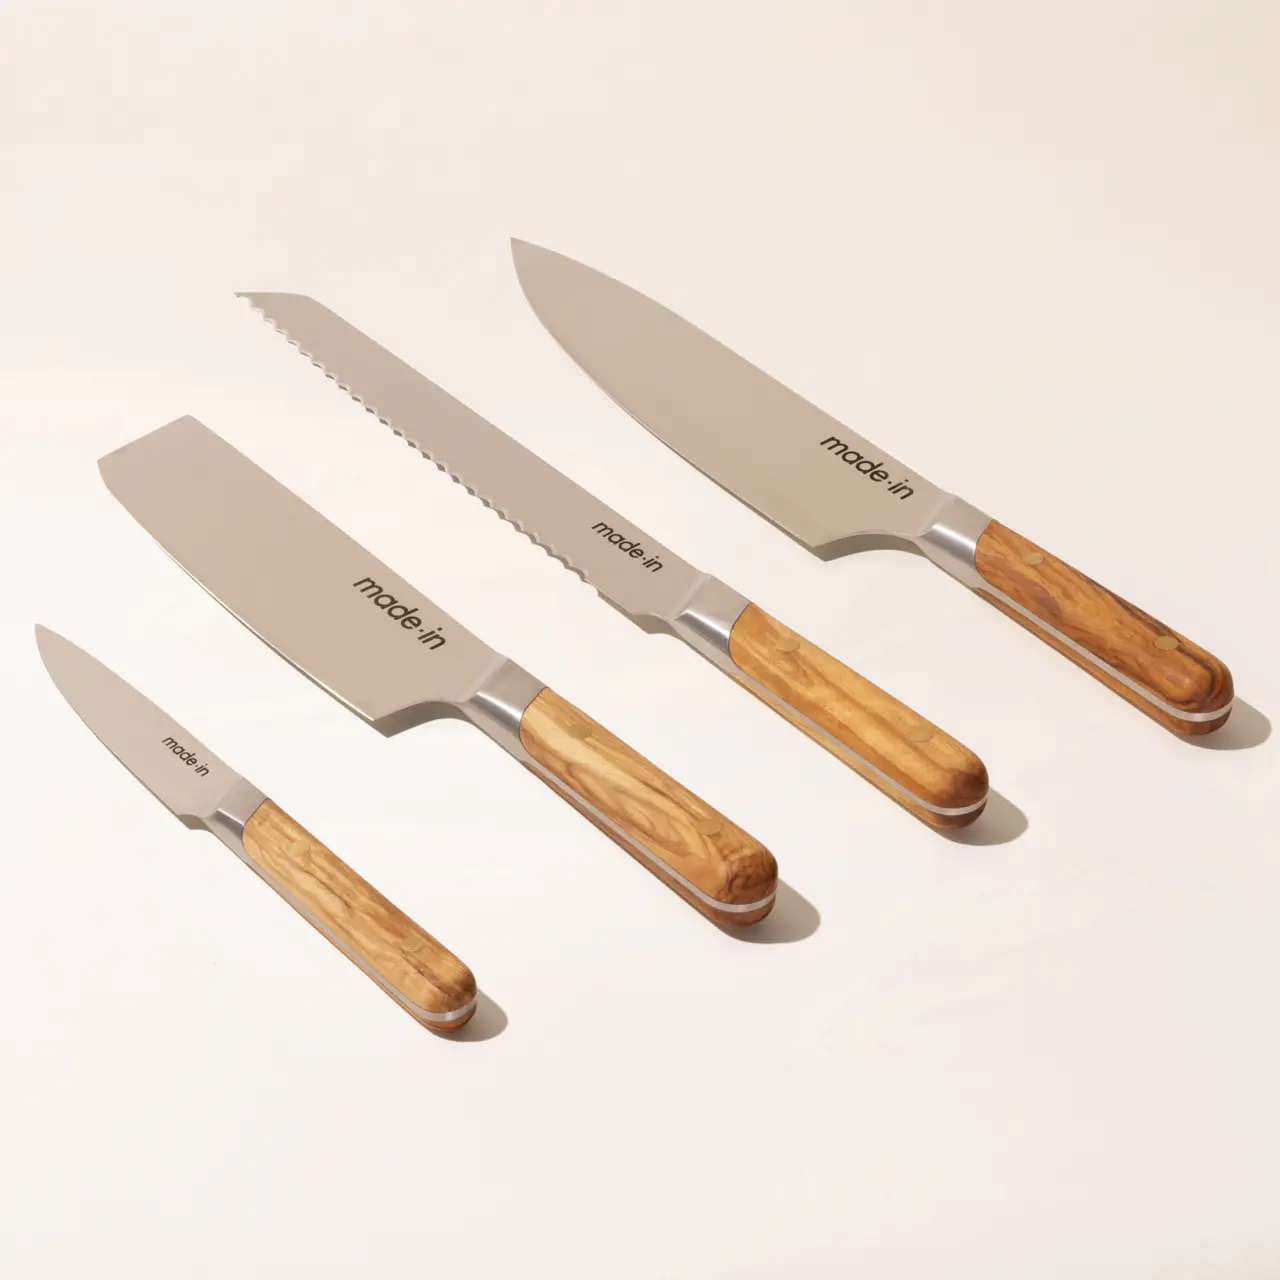 A set of four kitchen knives with wooden handles arranged by size on a light background.